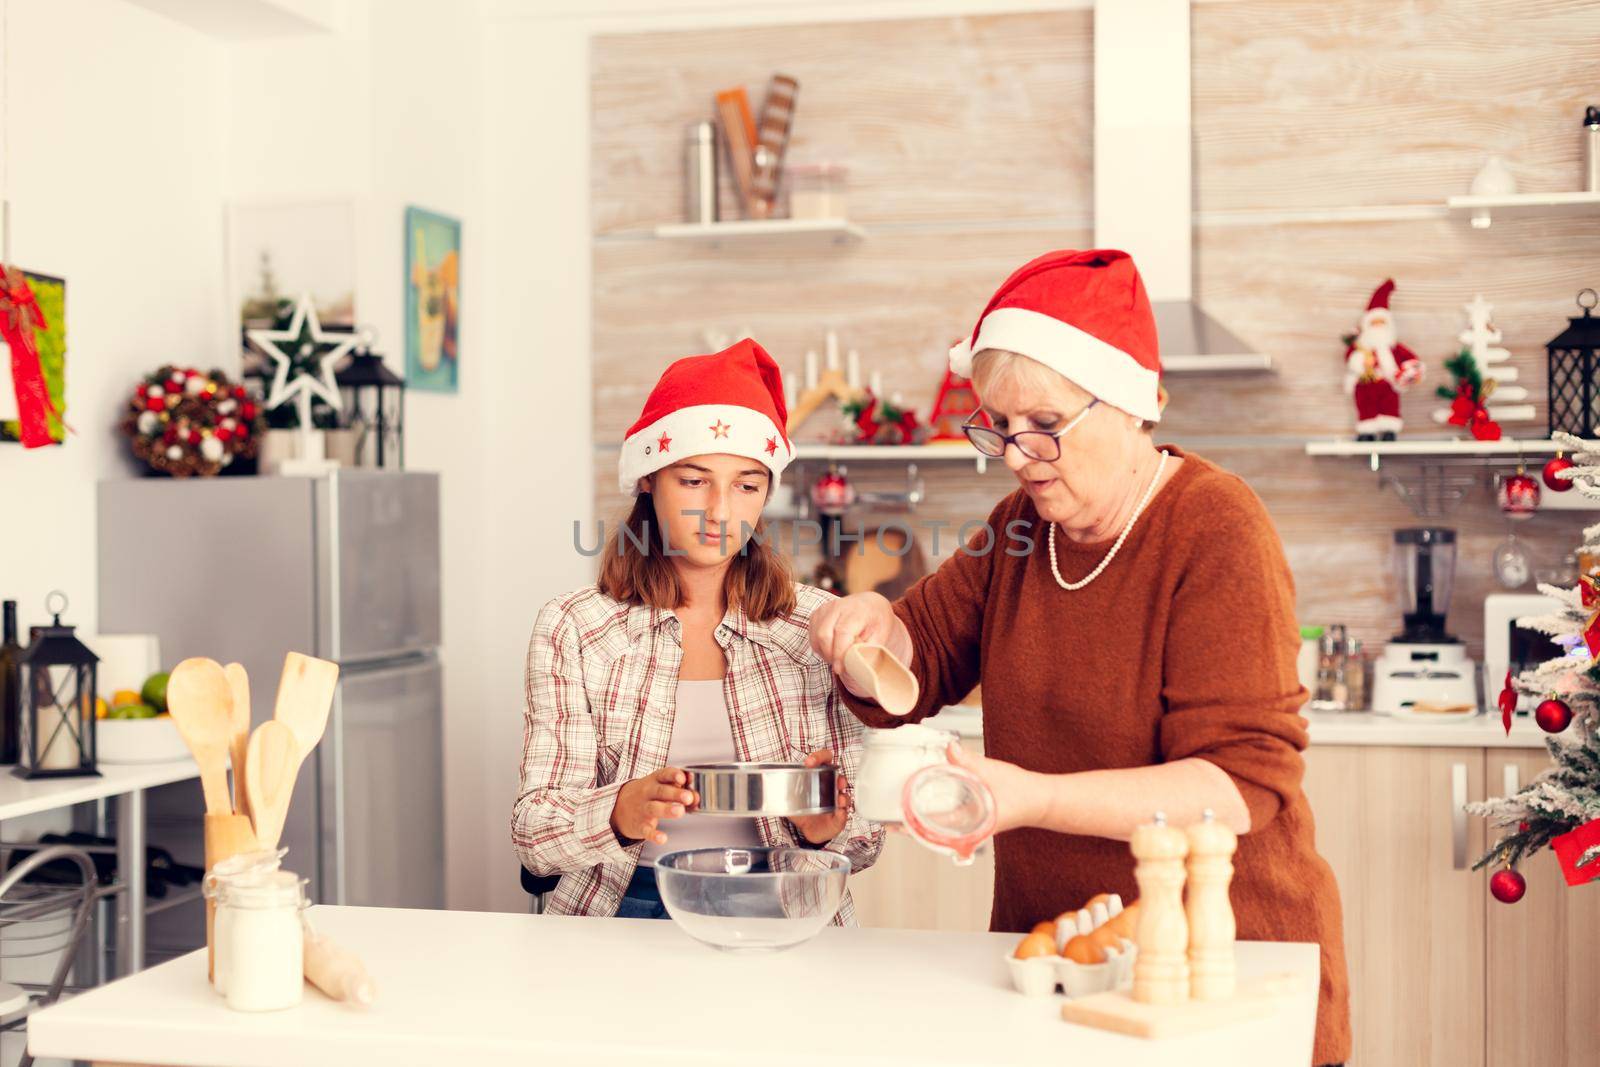 Niece on christmas day making cookies with grandmother in decorated kitchen. Happy cheerful joyfull teenage girl helping senior woman preparing sweet biscuits to celebrate winter holidays wearing santa hat.